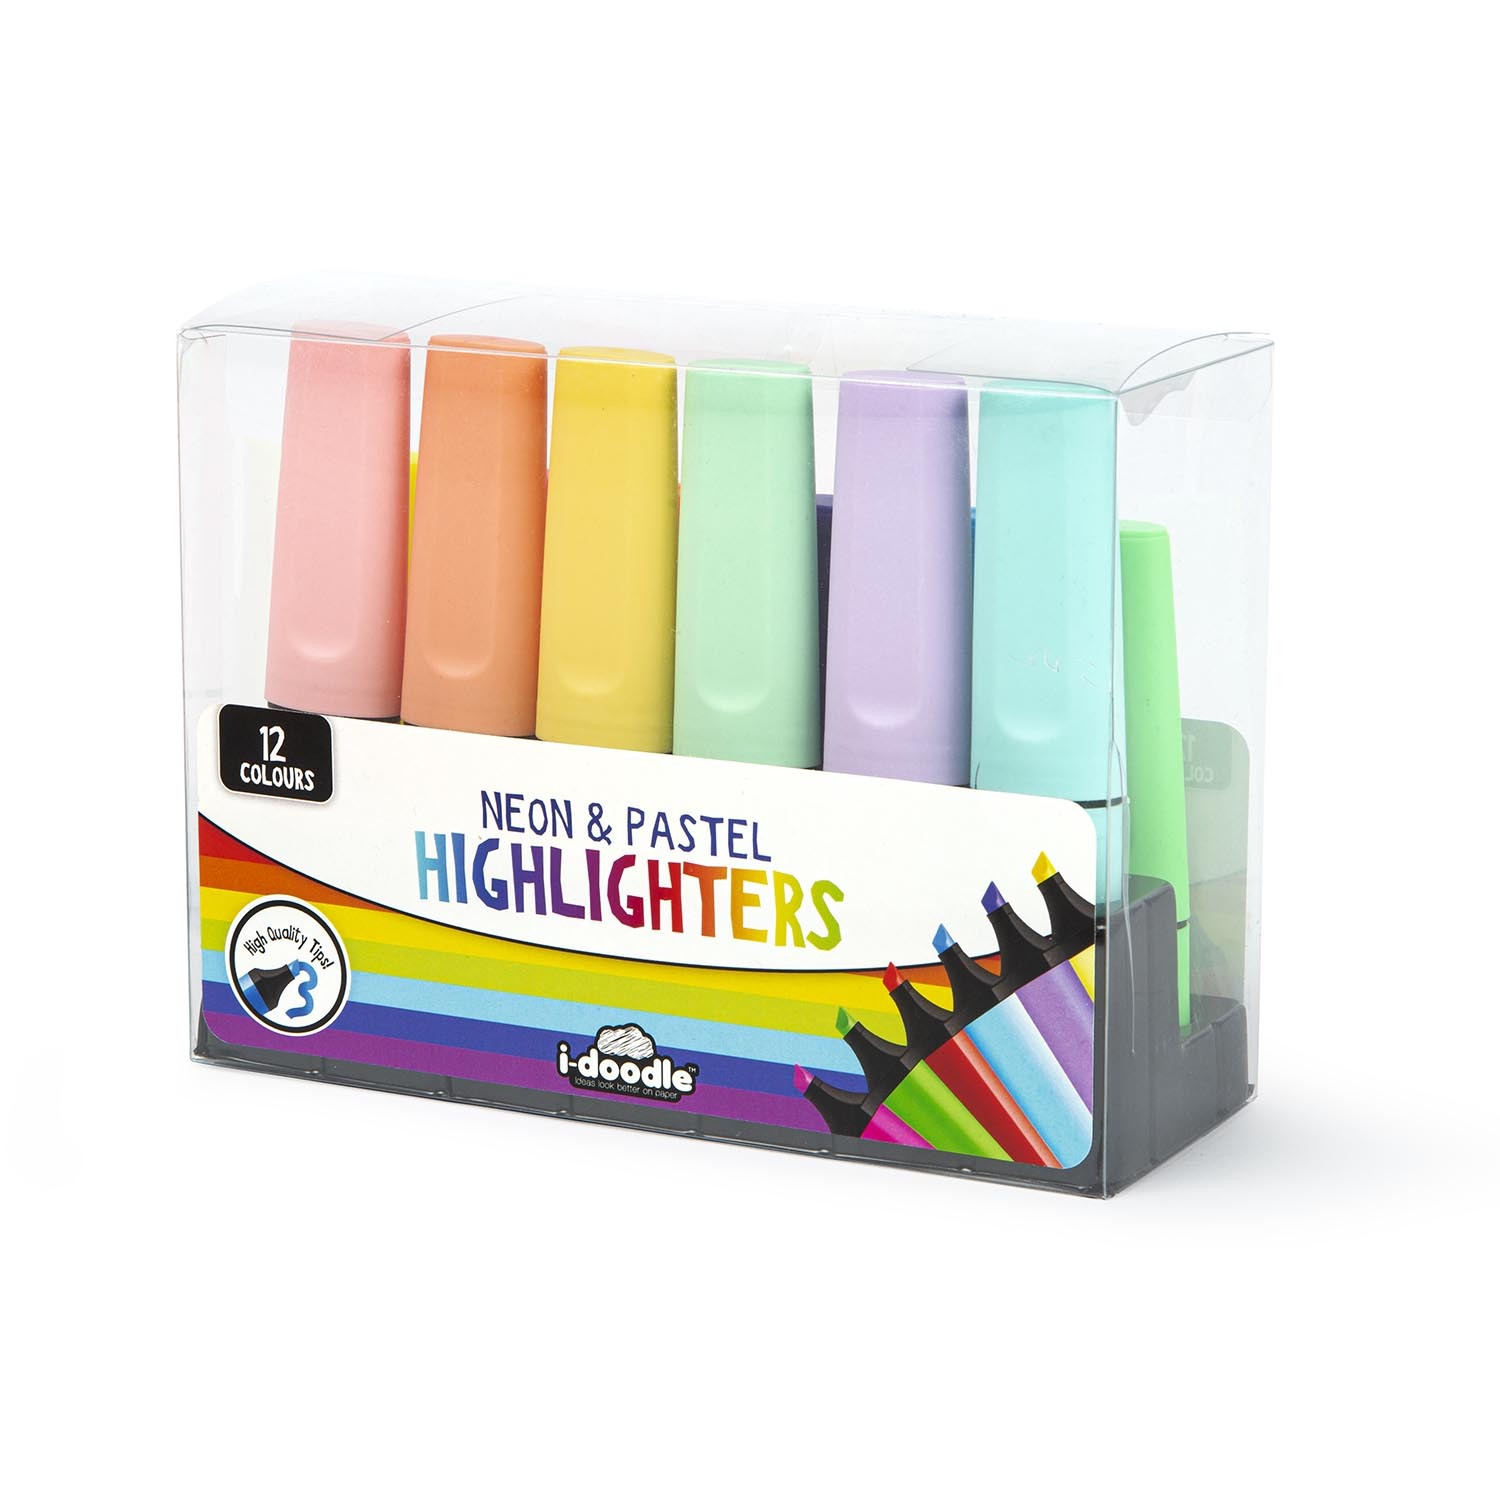 i-doodle Neon and Pastel Highlighters 12 Pack Image 1